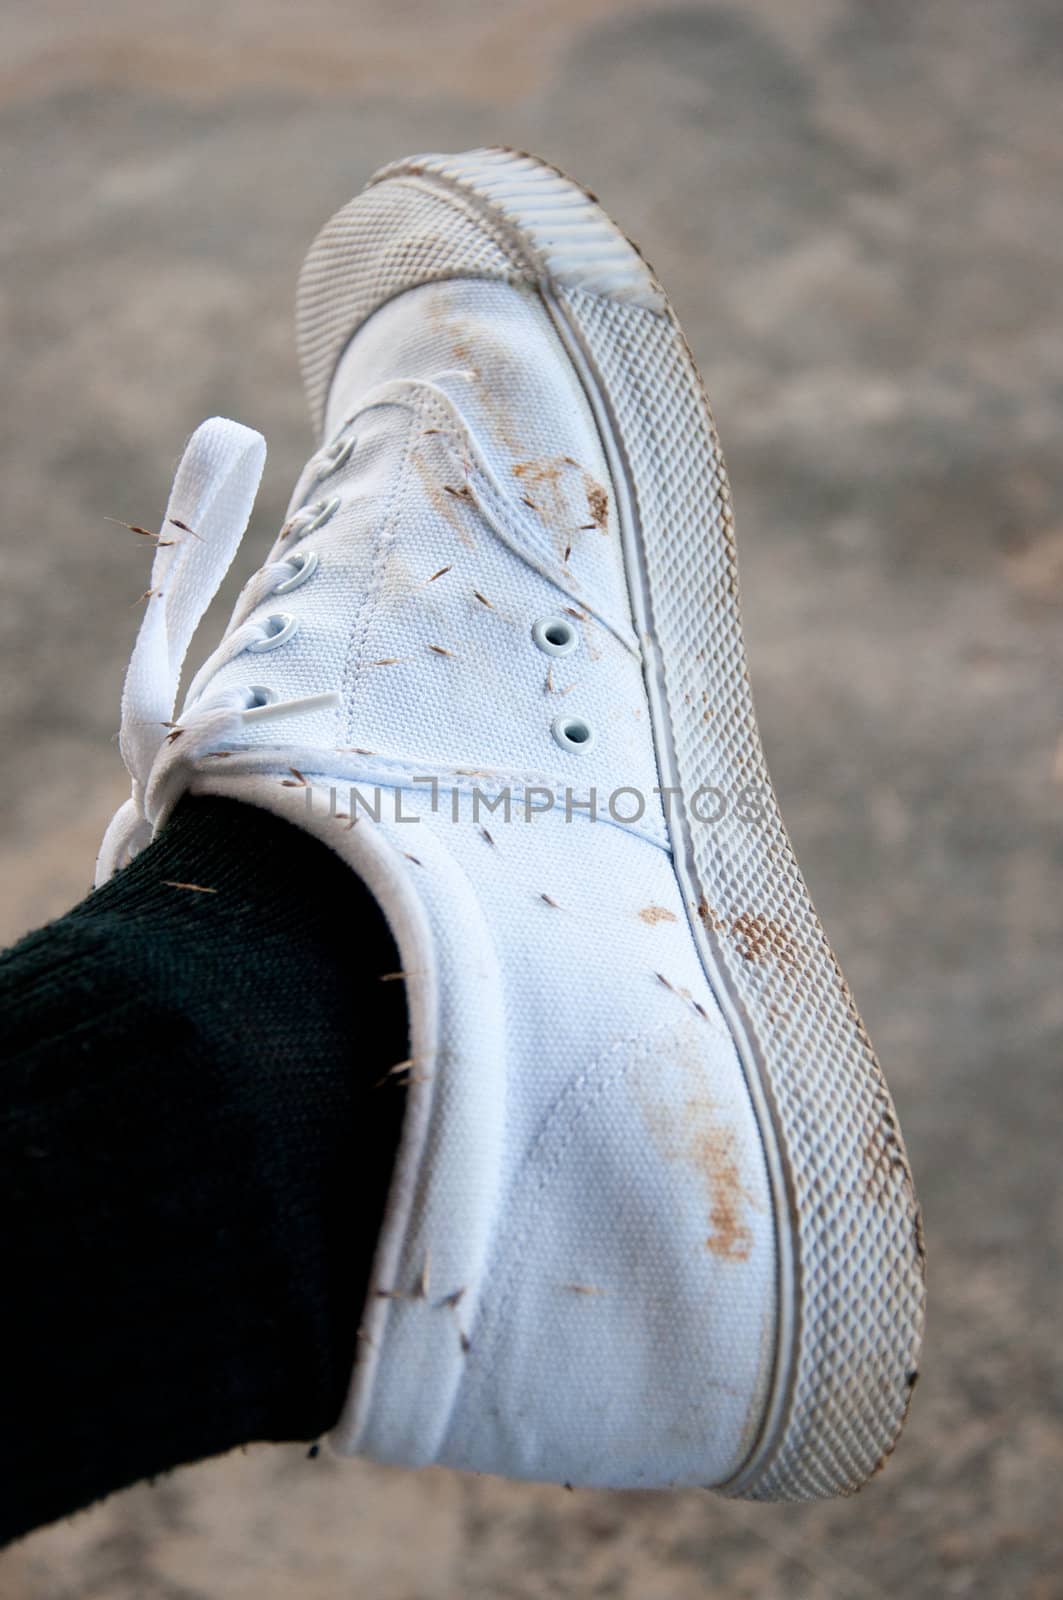 dirty white shoe by ngarare